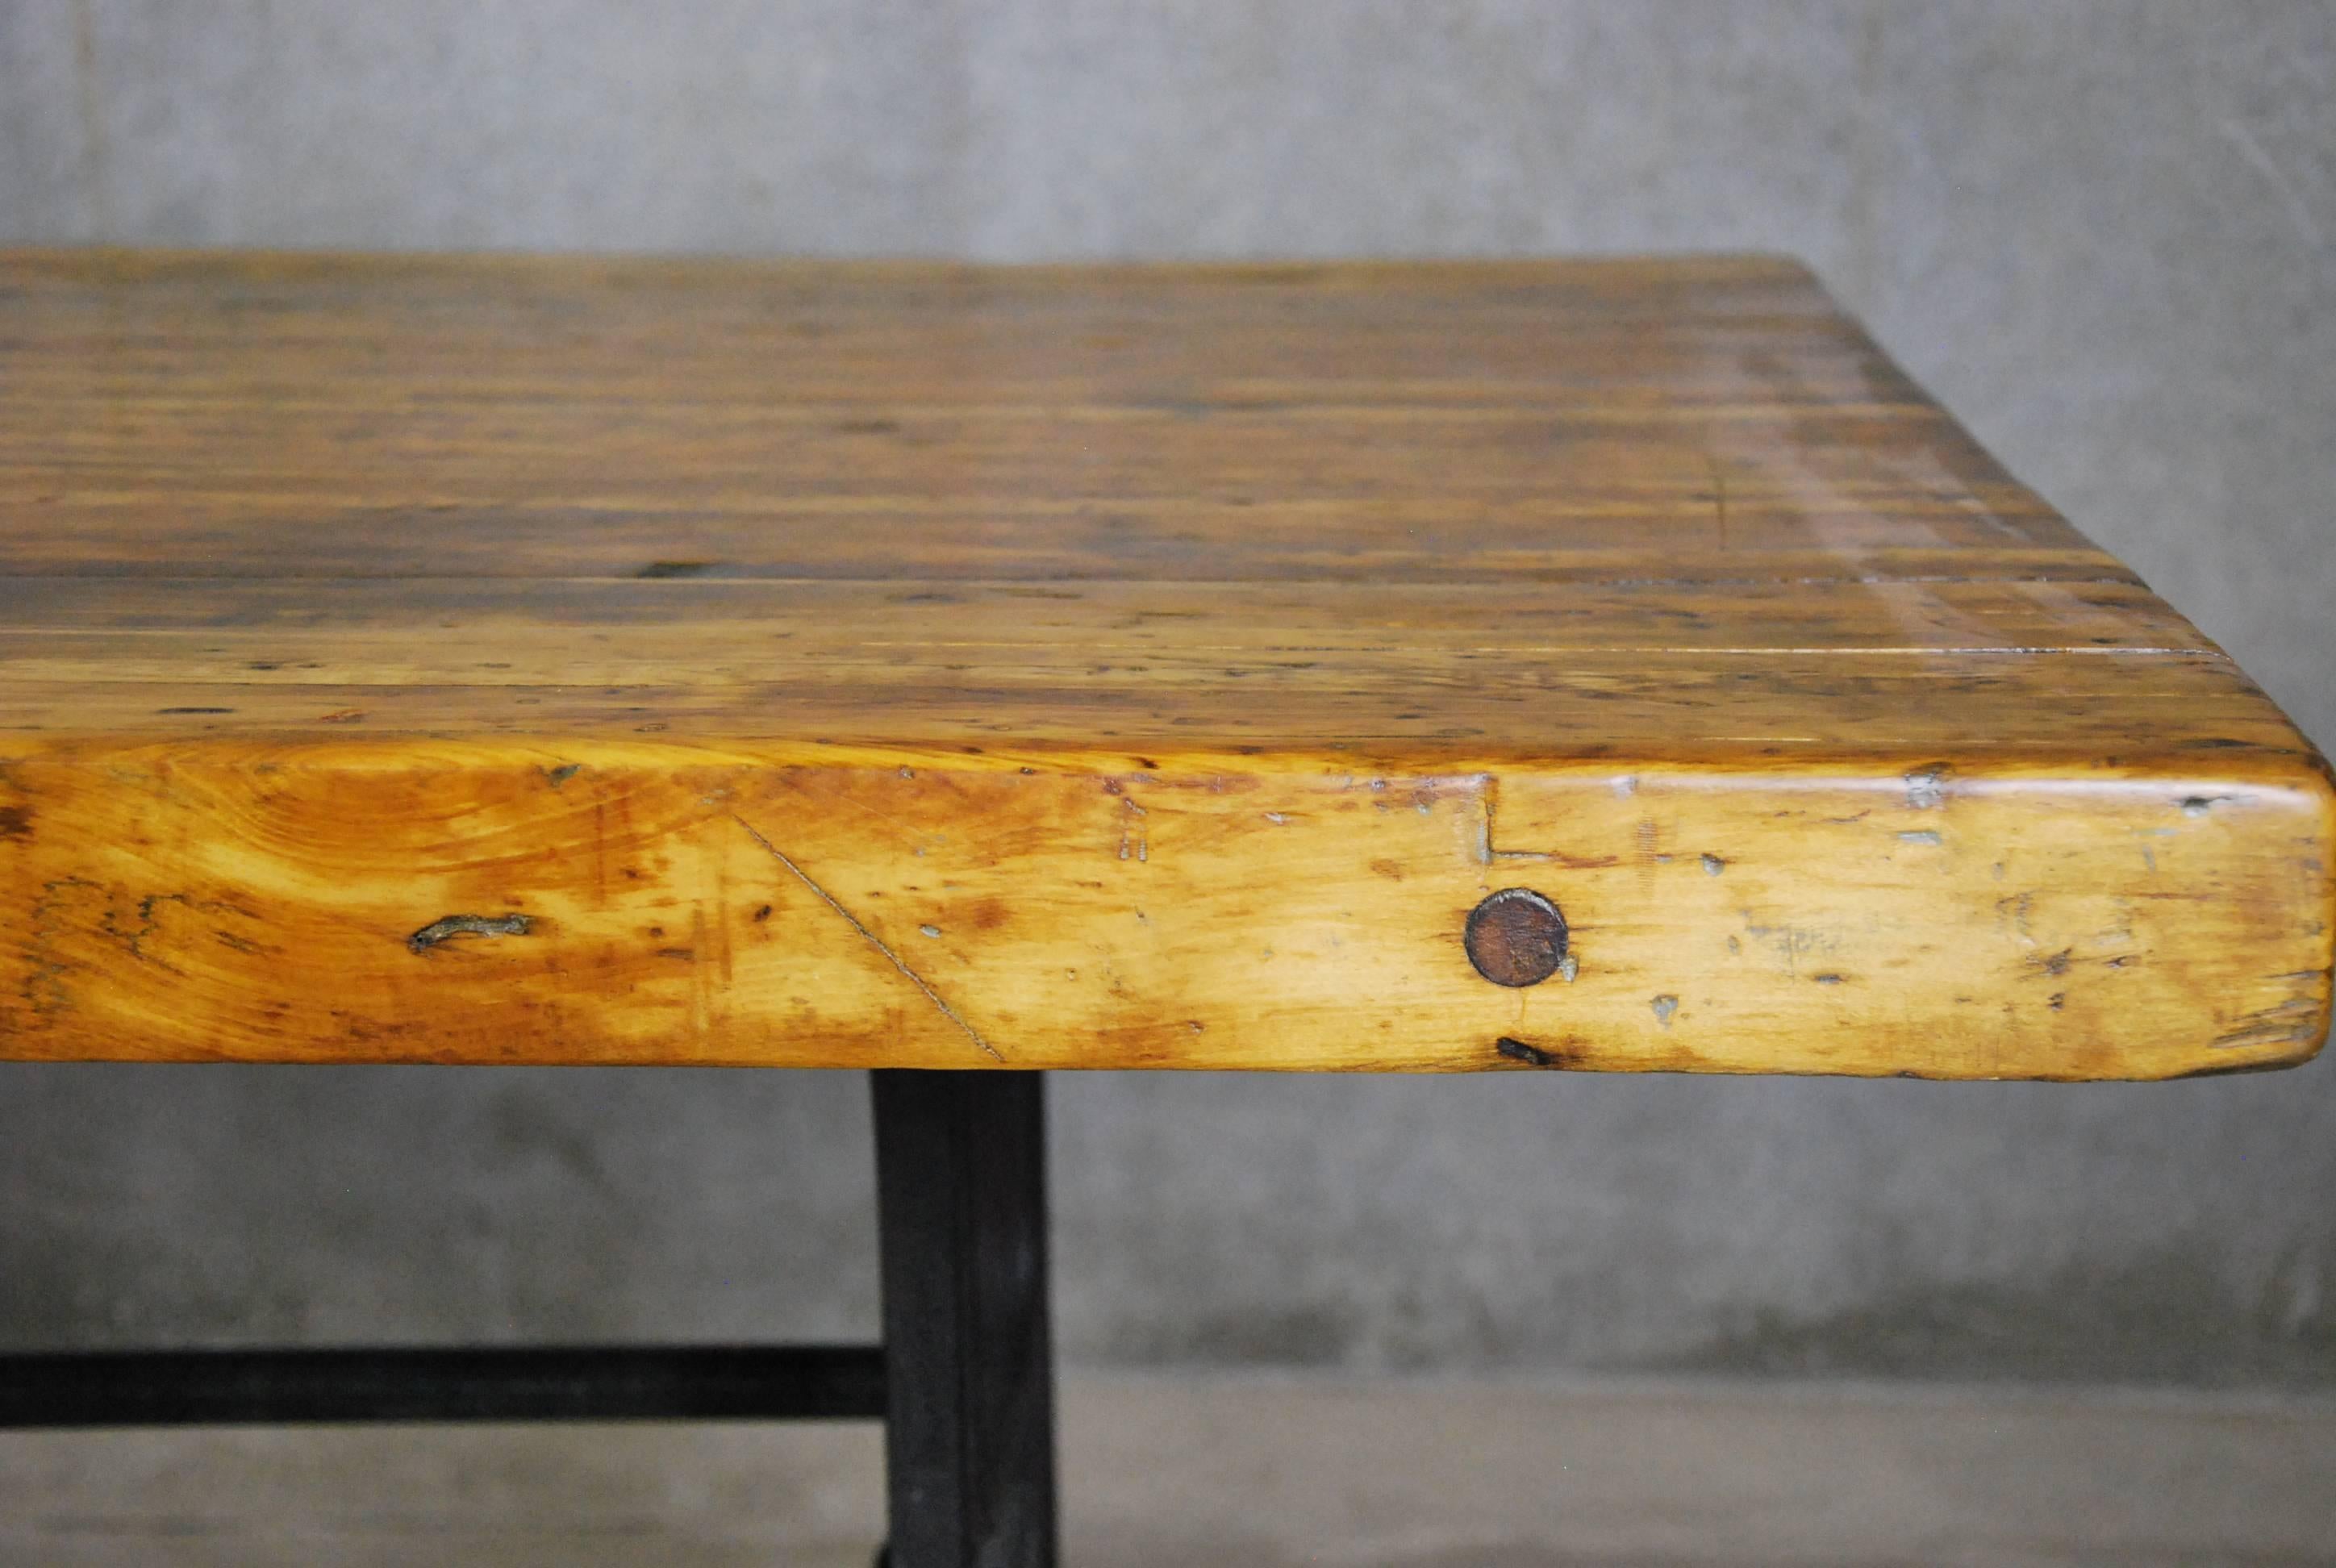 We found this rare, 1920 maple tabletop in a factory outside Chicago. Its cast iron base was salvaged from an old Industrial machine in that same factory. The merger of these two antique elements has resulted in a beautiful, 10-foot long